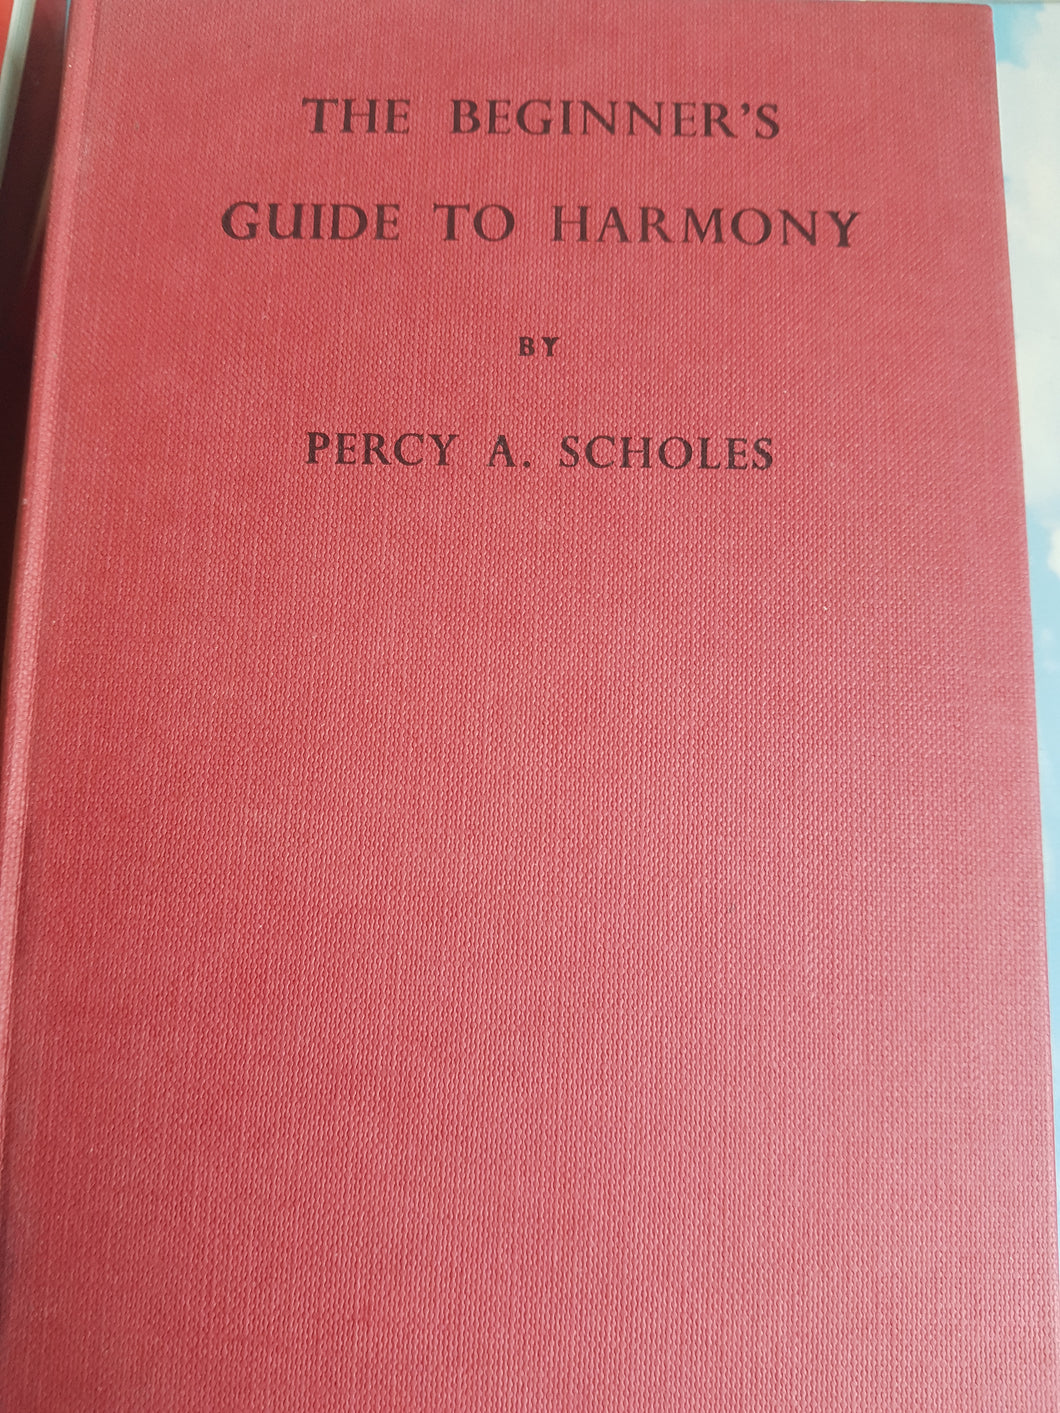 The Beginner'S Guide To Harmony. Hardcover.  Percy Scholes.